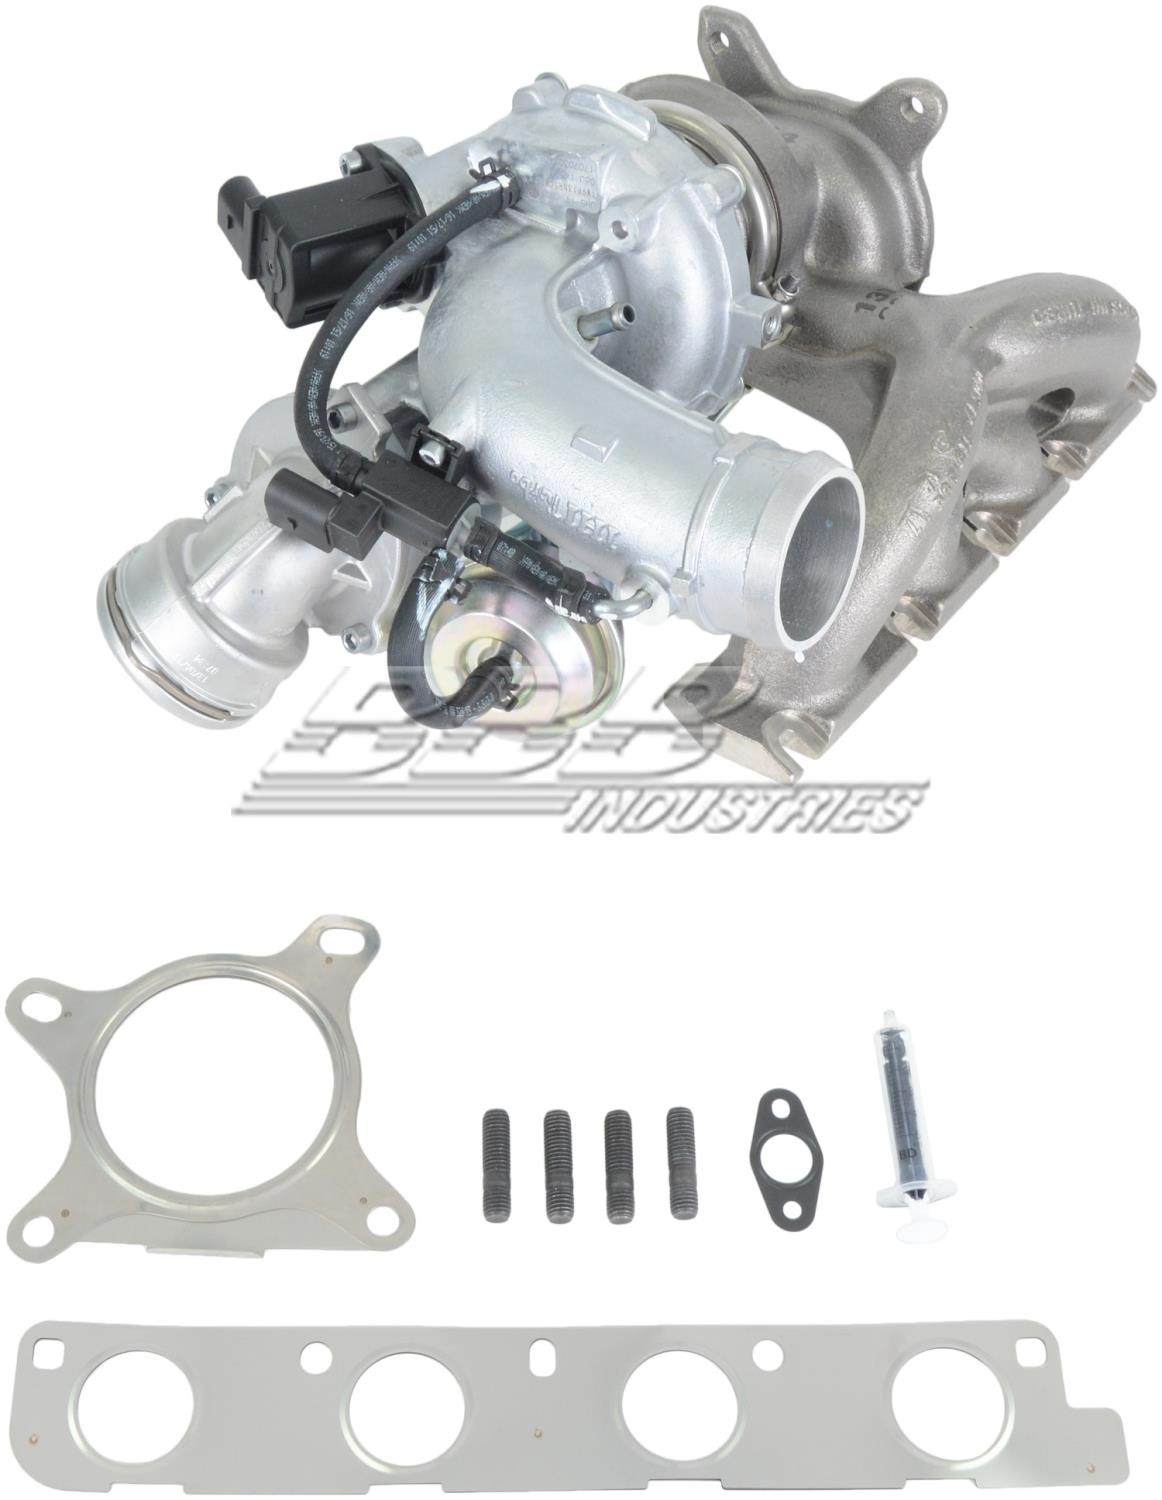 oe-turbopower remanufactured turbocharger  frsport g6017